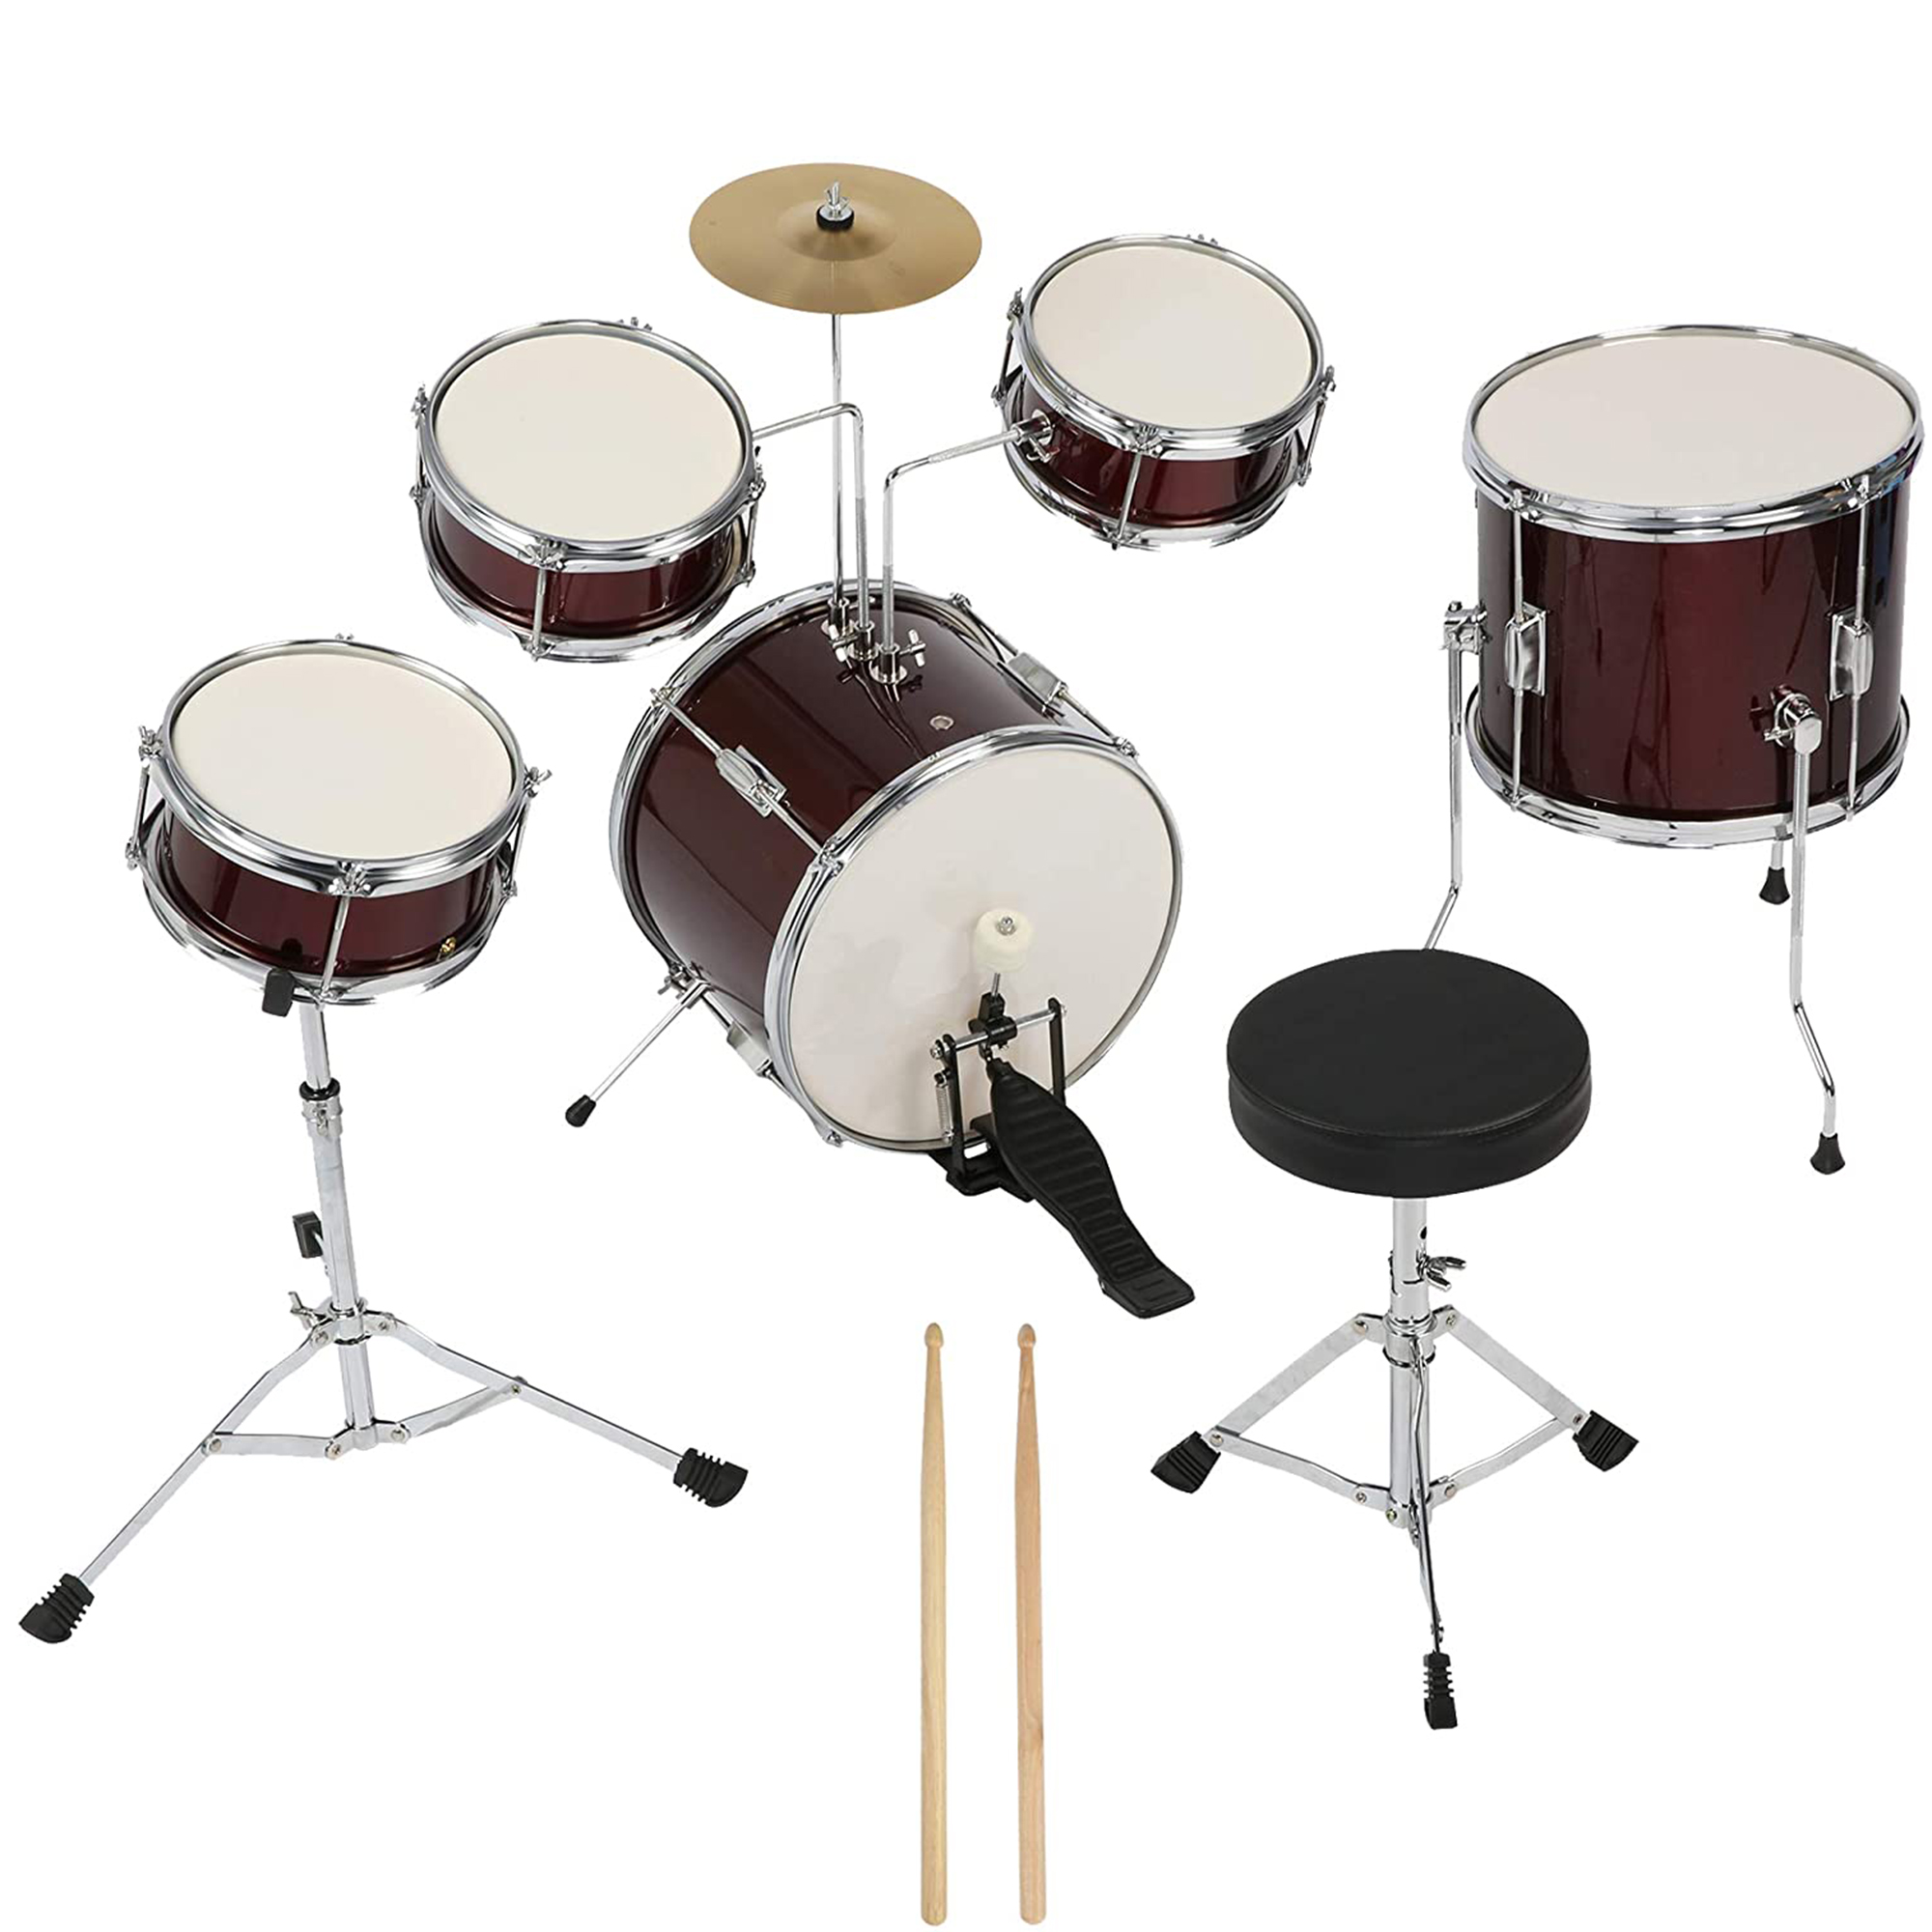 KARMAS PRODUCT Kids Drum Set 5-Piece Junior Musical Instrument Beginner Kit with 14" Bass, Adjustable Throne, Cymbals, Pedals, Drumsticks - image 1 of 7